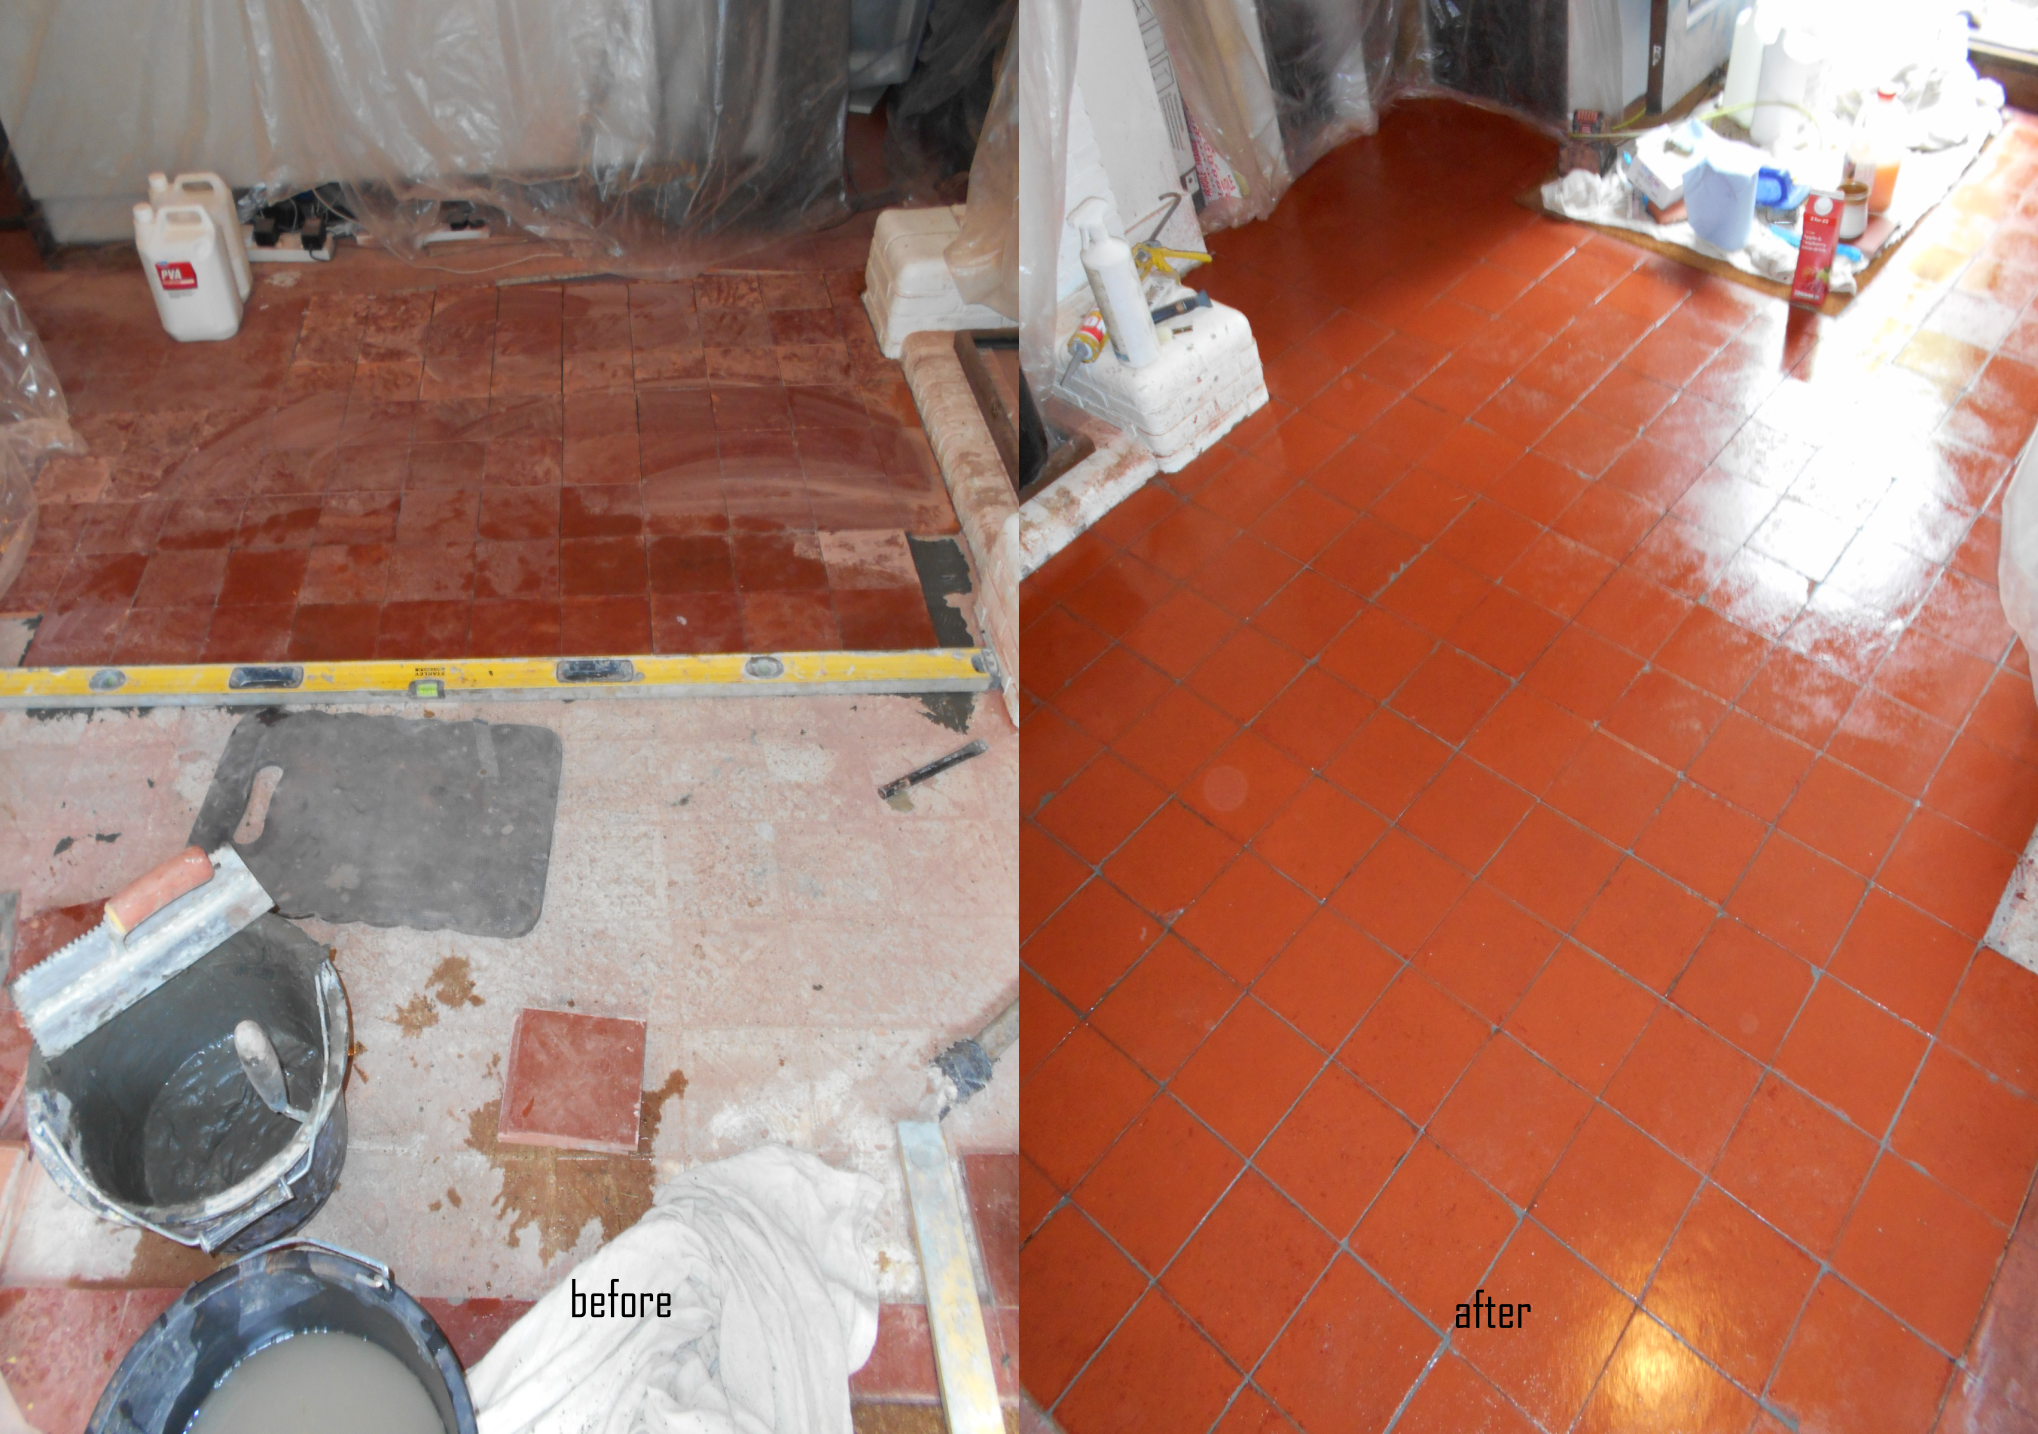 Quarry tiled floor lifted, relayed and cleaned and sealed